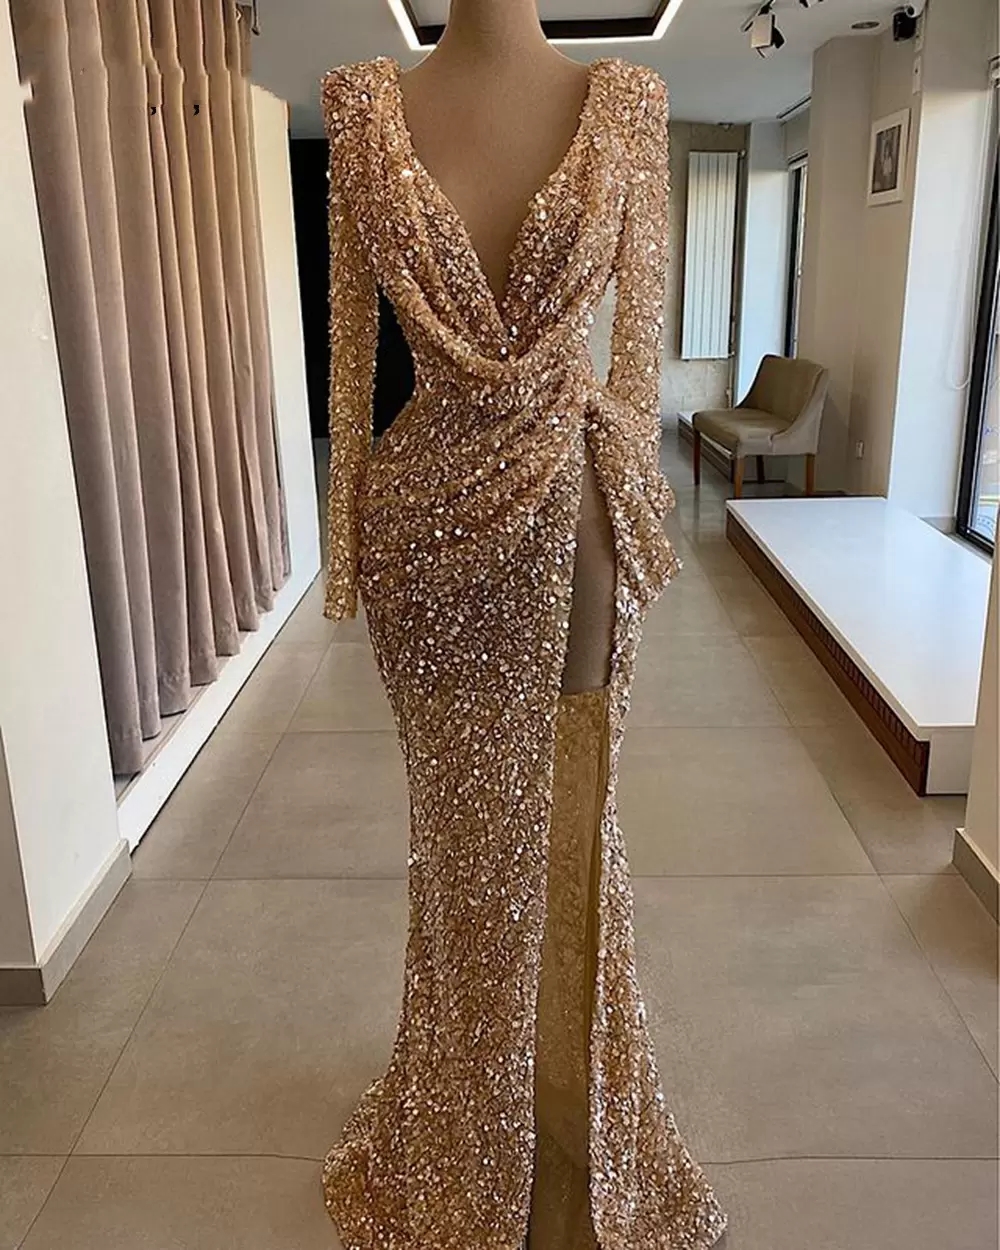 

Sparkly Sequined Prom Dresses 2022 Long Sleeve Sexy High Slit V Neck Mermaid Rose Gold Dubai Women Formal Evening Gowns, Same as picture